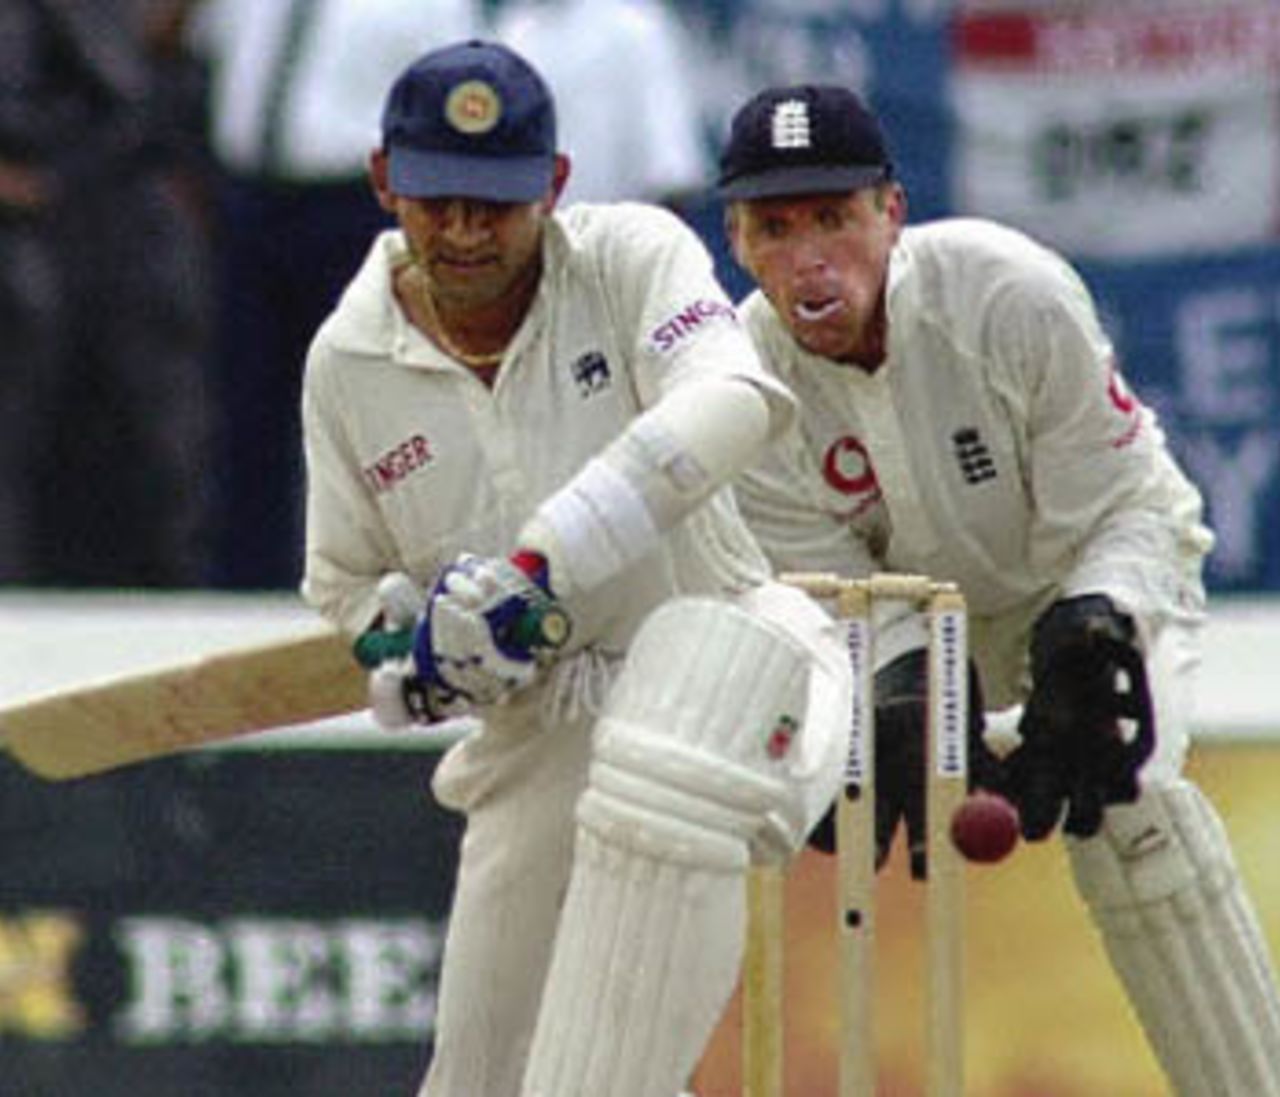 Sri Lankan batsman Marvan Atapattu (L) hits a ball on the first day of the first cricket Test match at Galle International Stadium, 22 February 2001, as England's wicketkeeper Alec Stewart (R) looks on. Sri Lanka recovered from the early loss of Sri Lankan skipper Sanath Jayasuriya for 14 to secure 70 for one wicket at lunch, with Atapattu not out at 18.